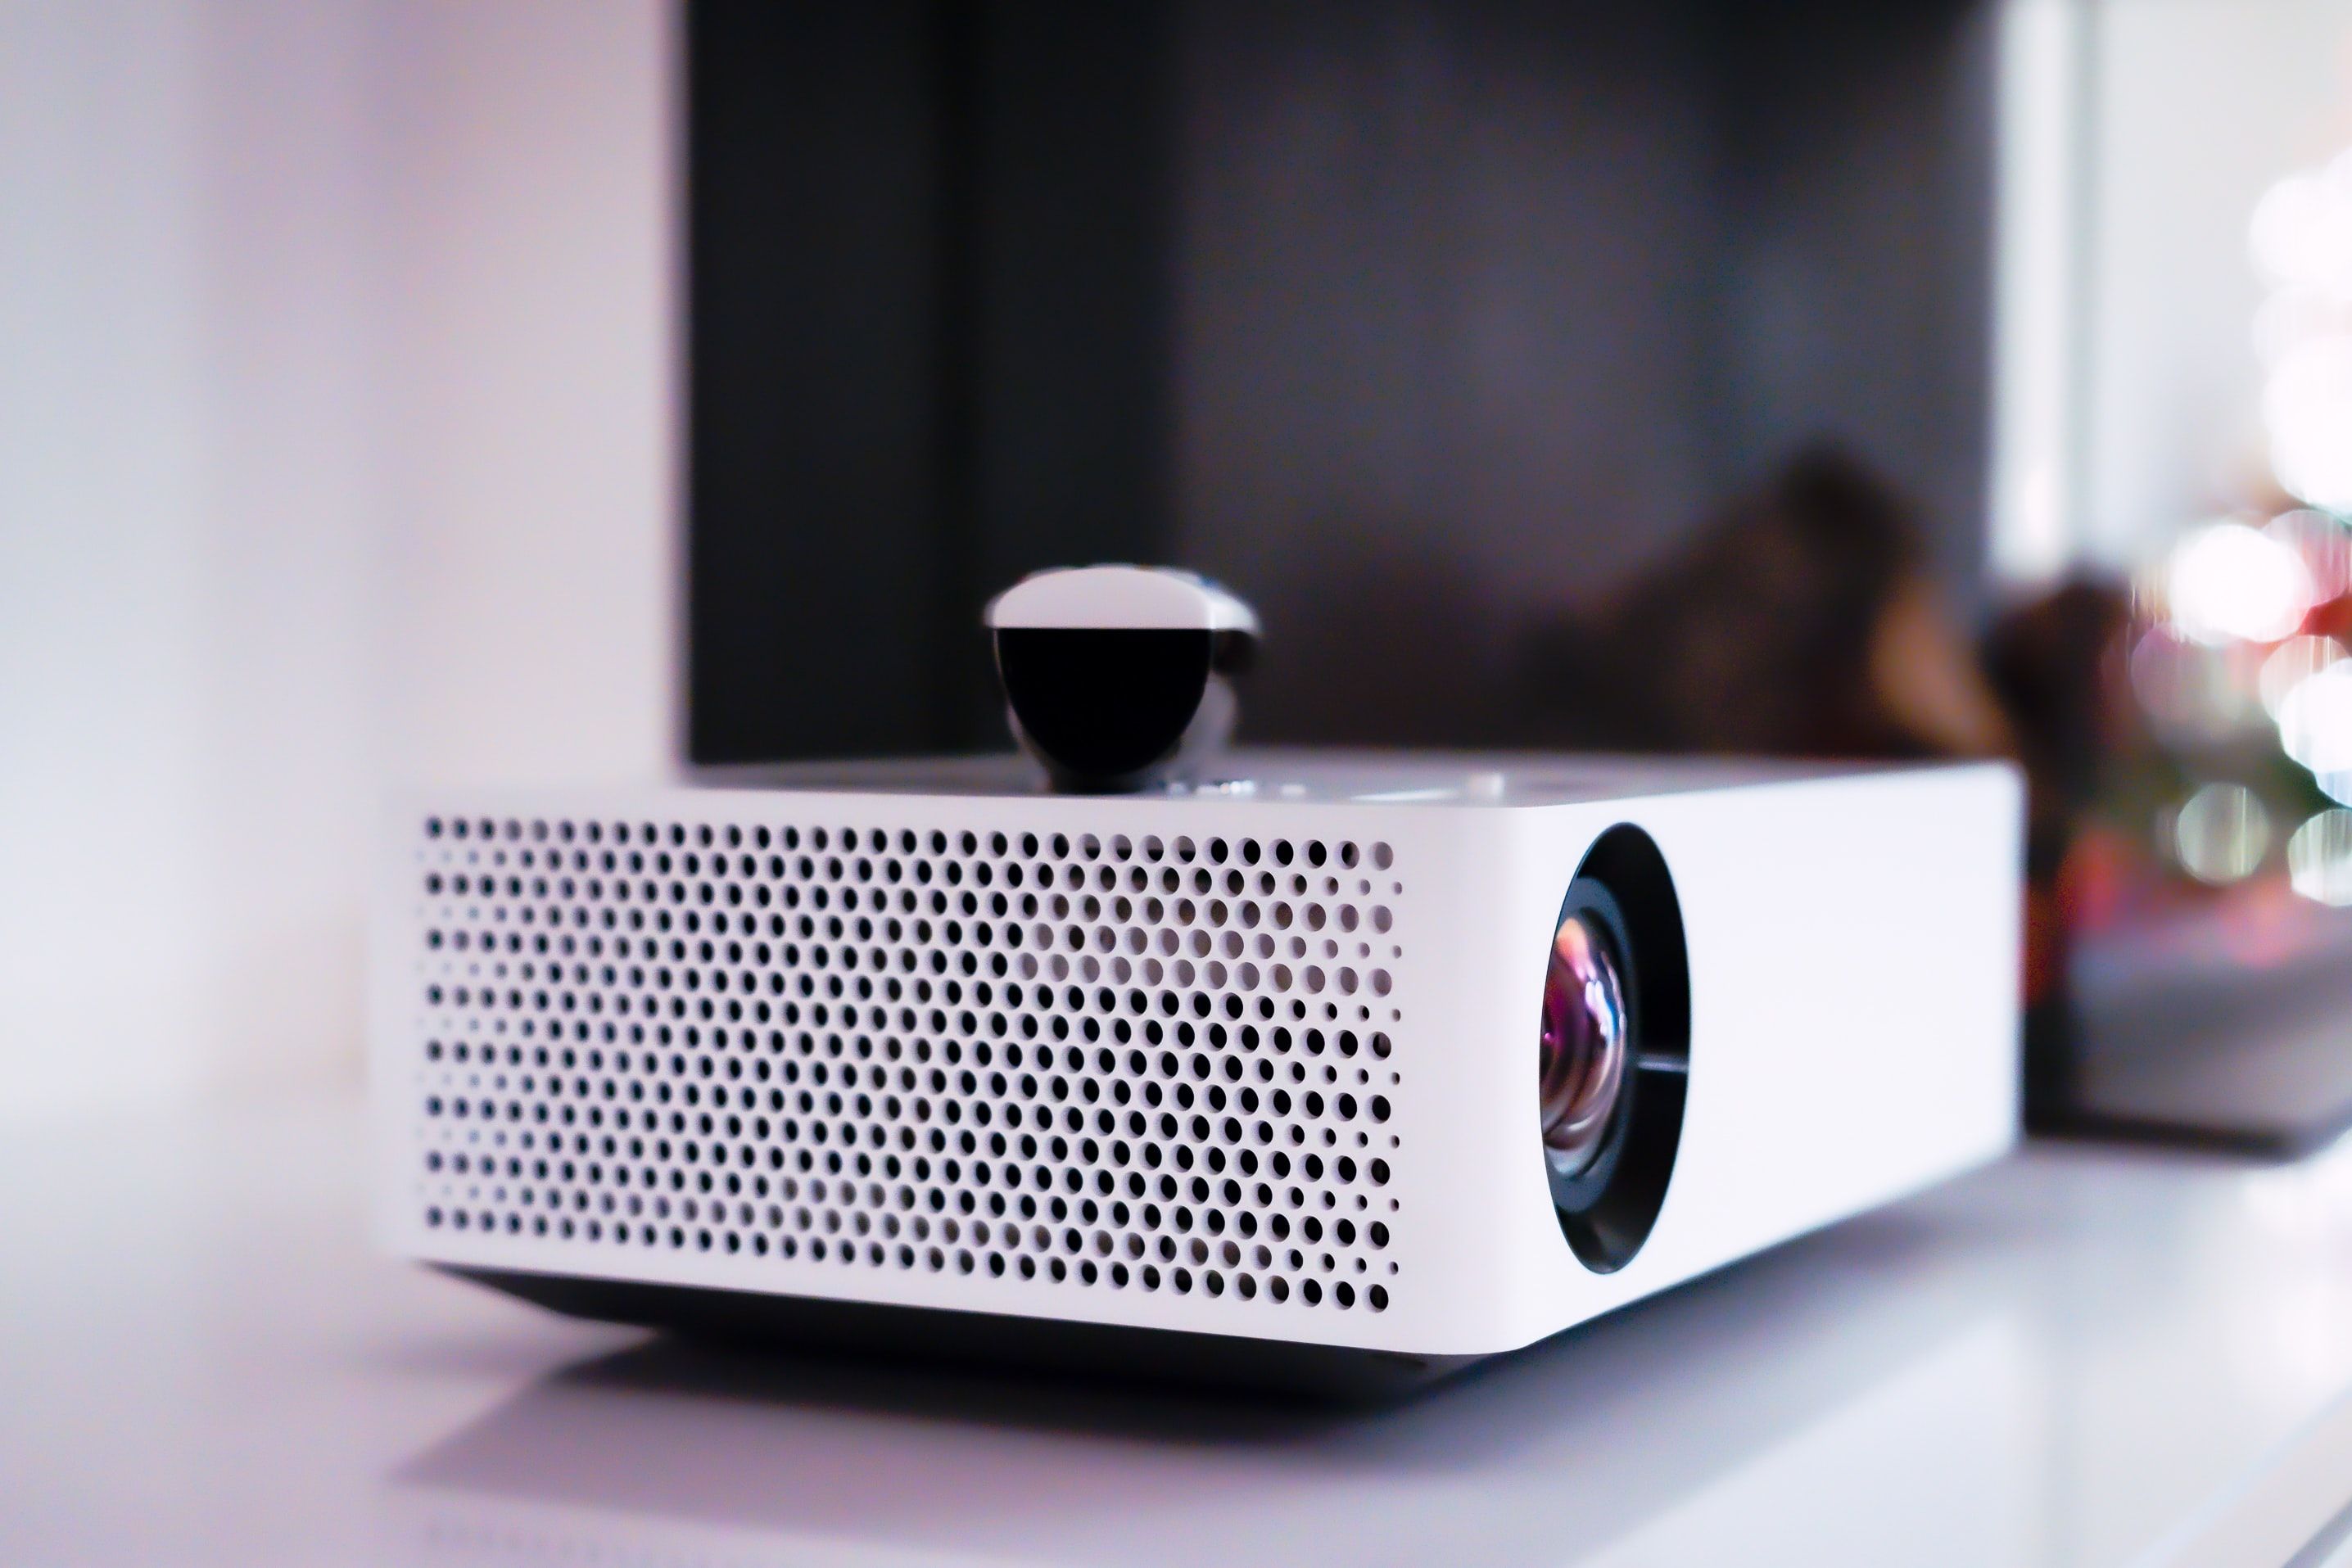 LED vs LCD projector, How to choose a projector